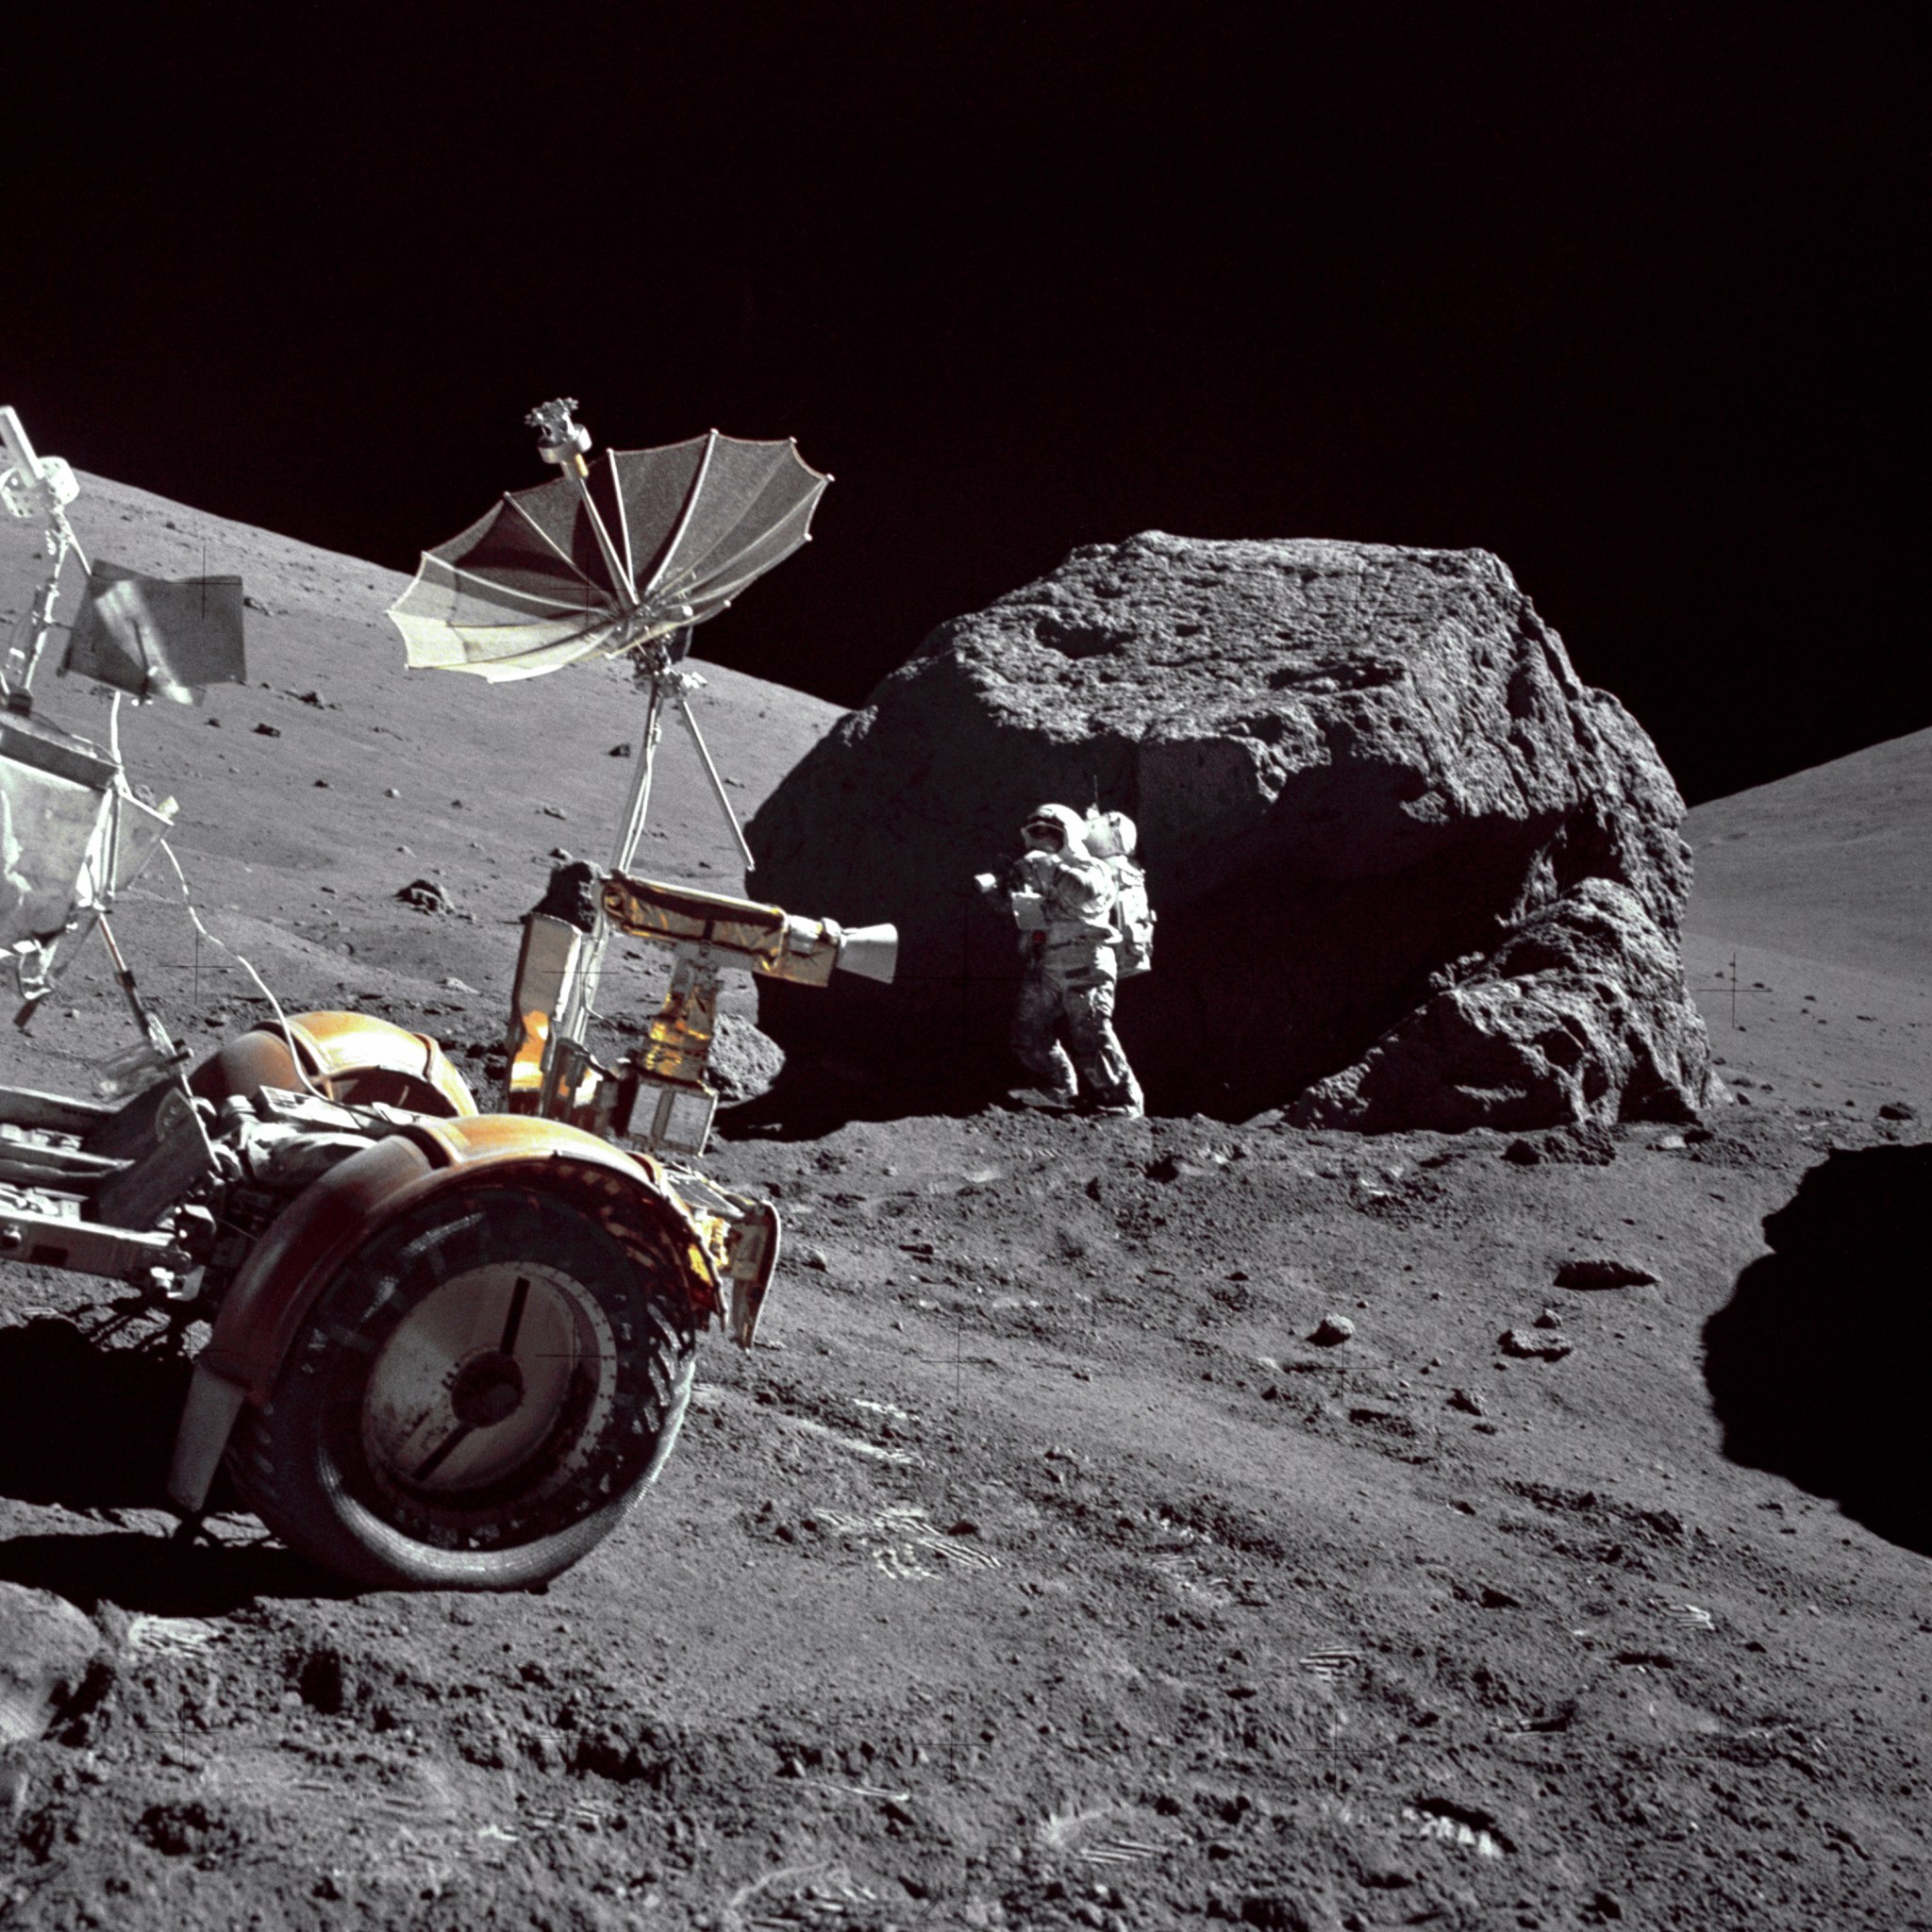 Astronaut on the Moon next to a bolder, with a rover in the foreground.